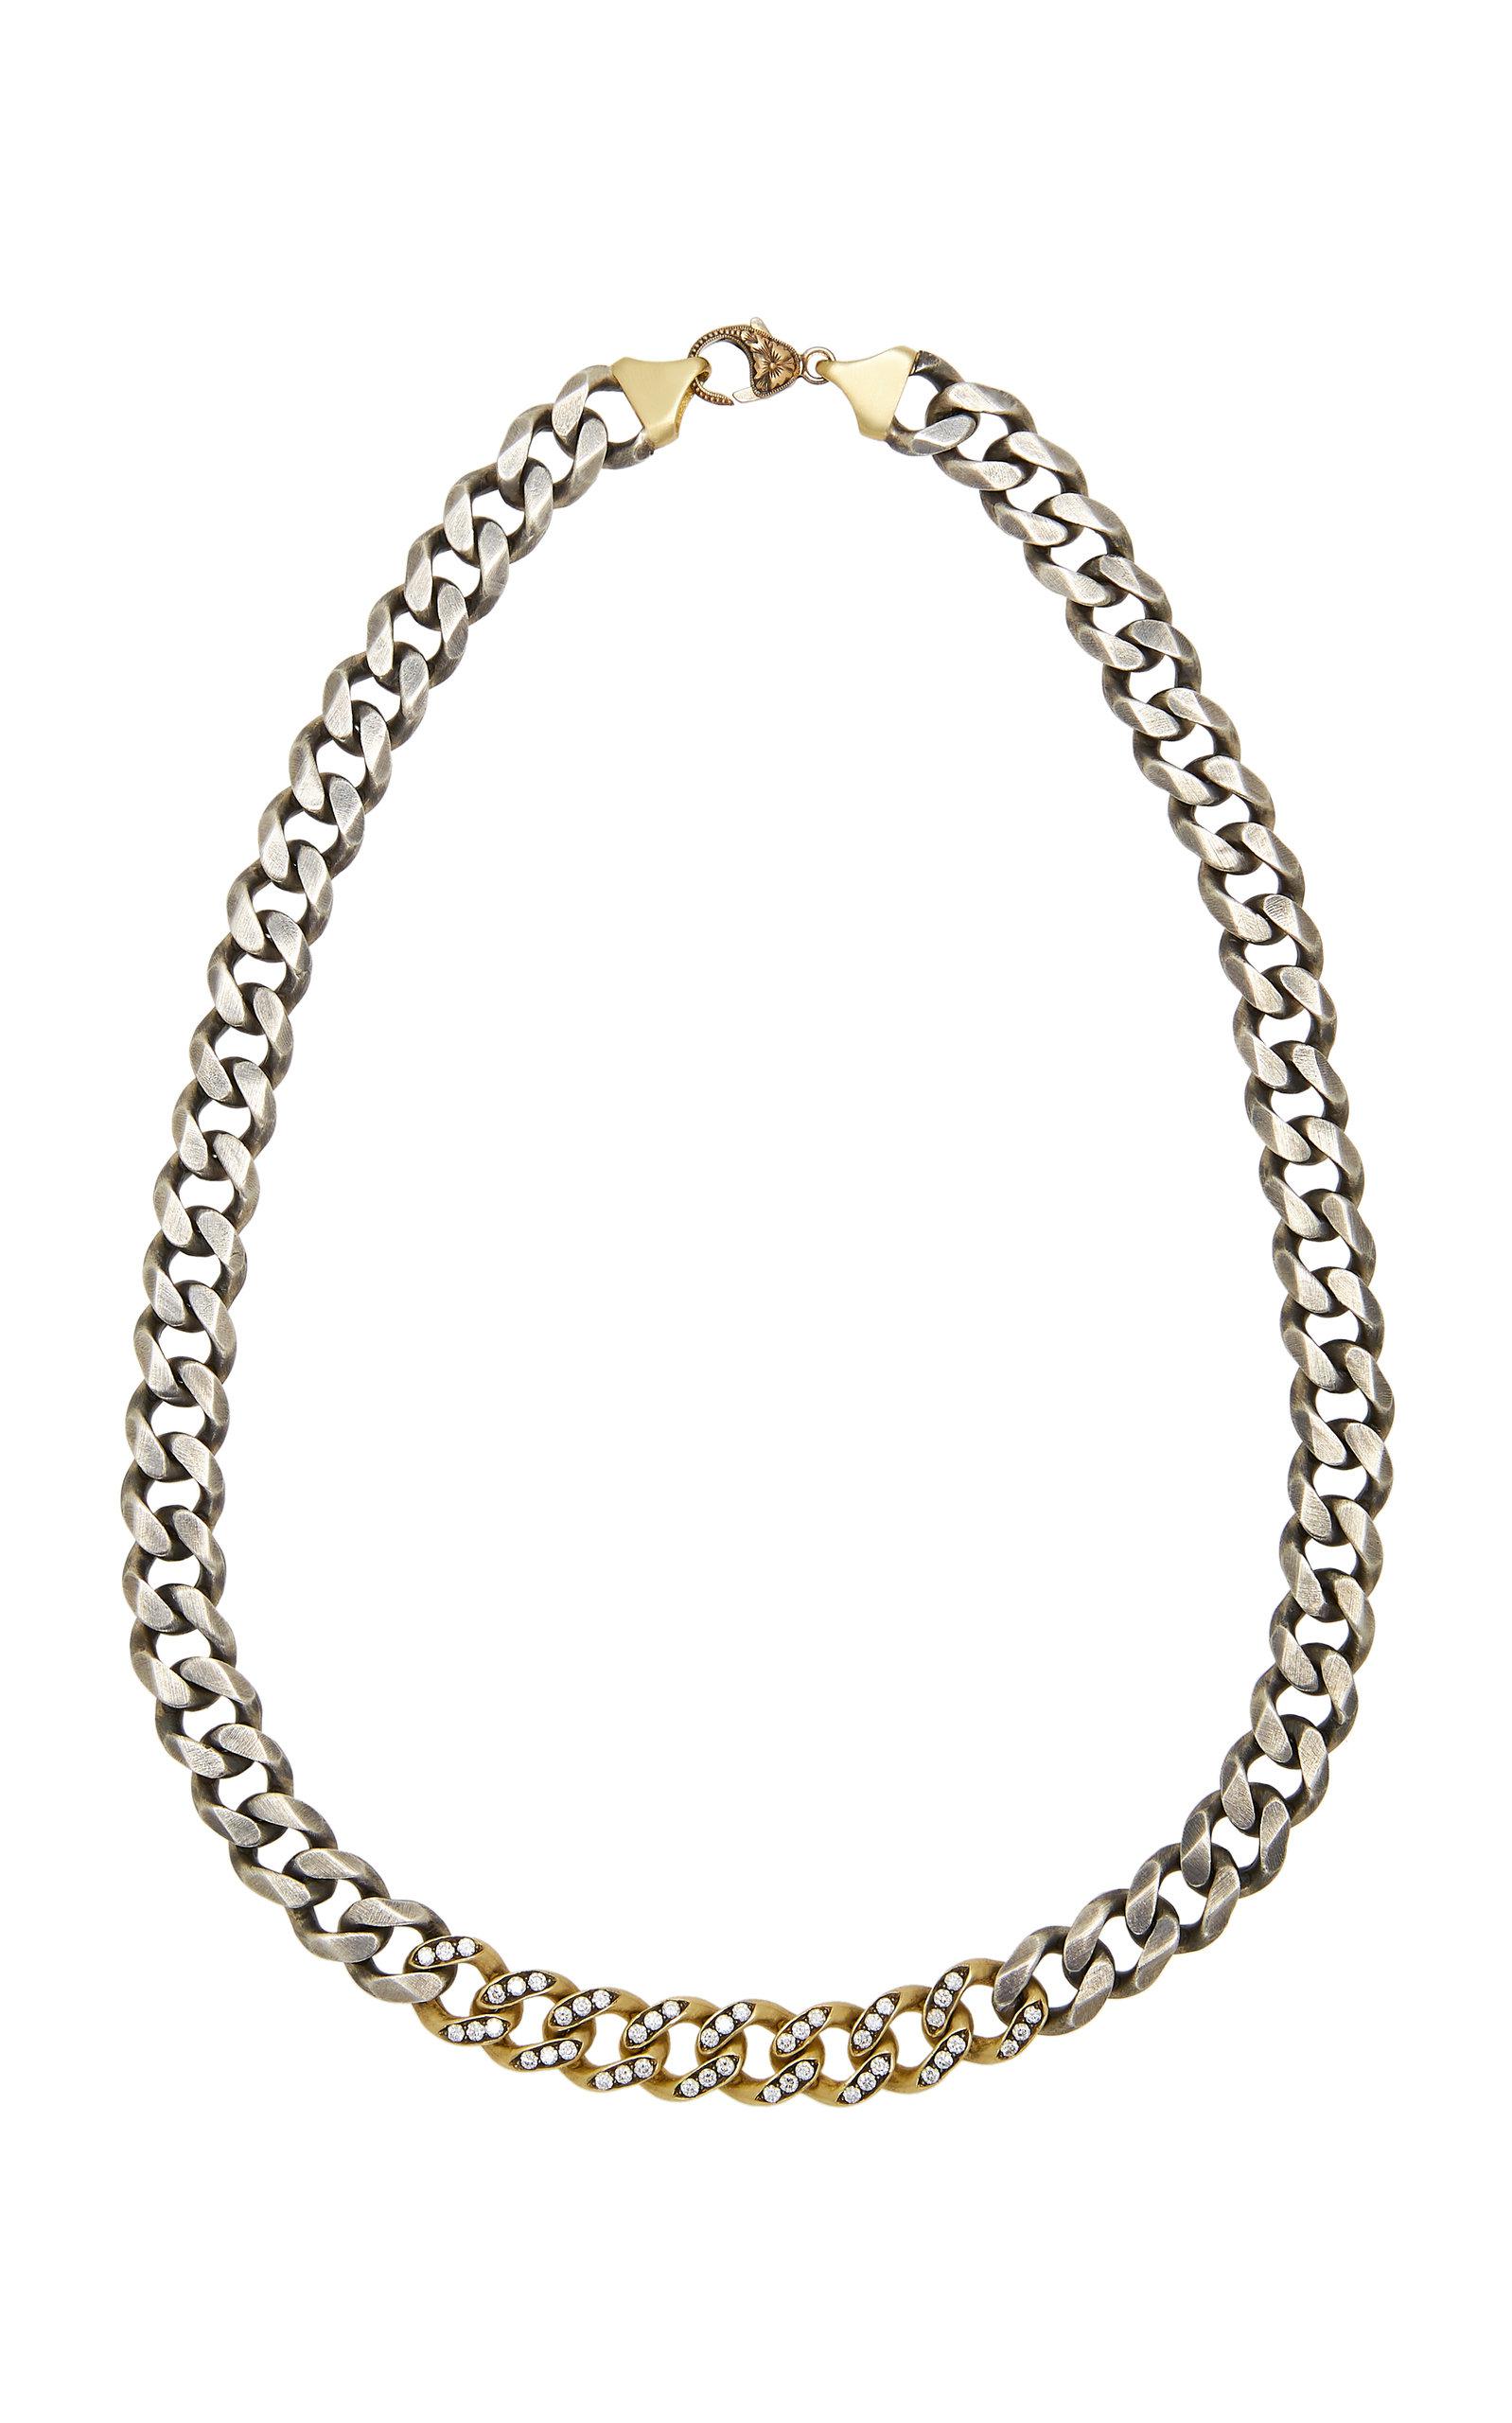 Lyst - Sylva & Cie 18k Gold, Sterling Silver And Diamond Necklace in ...